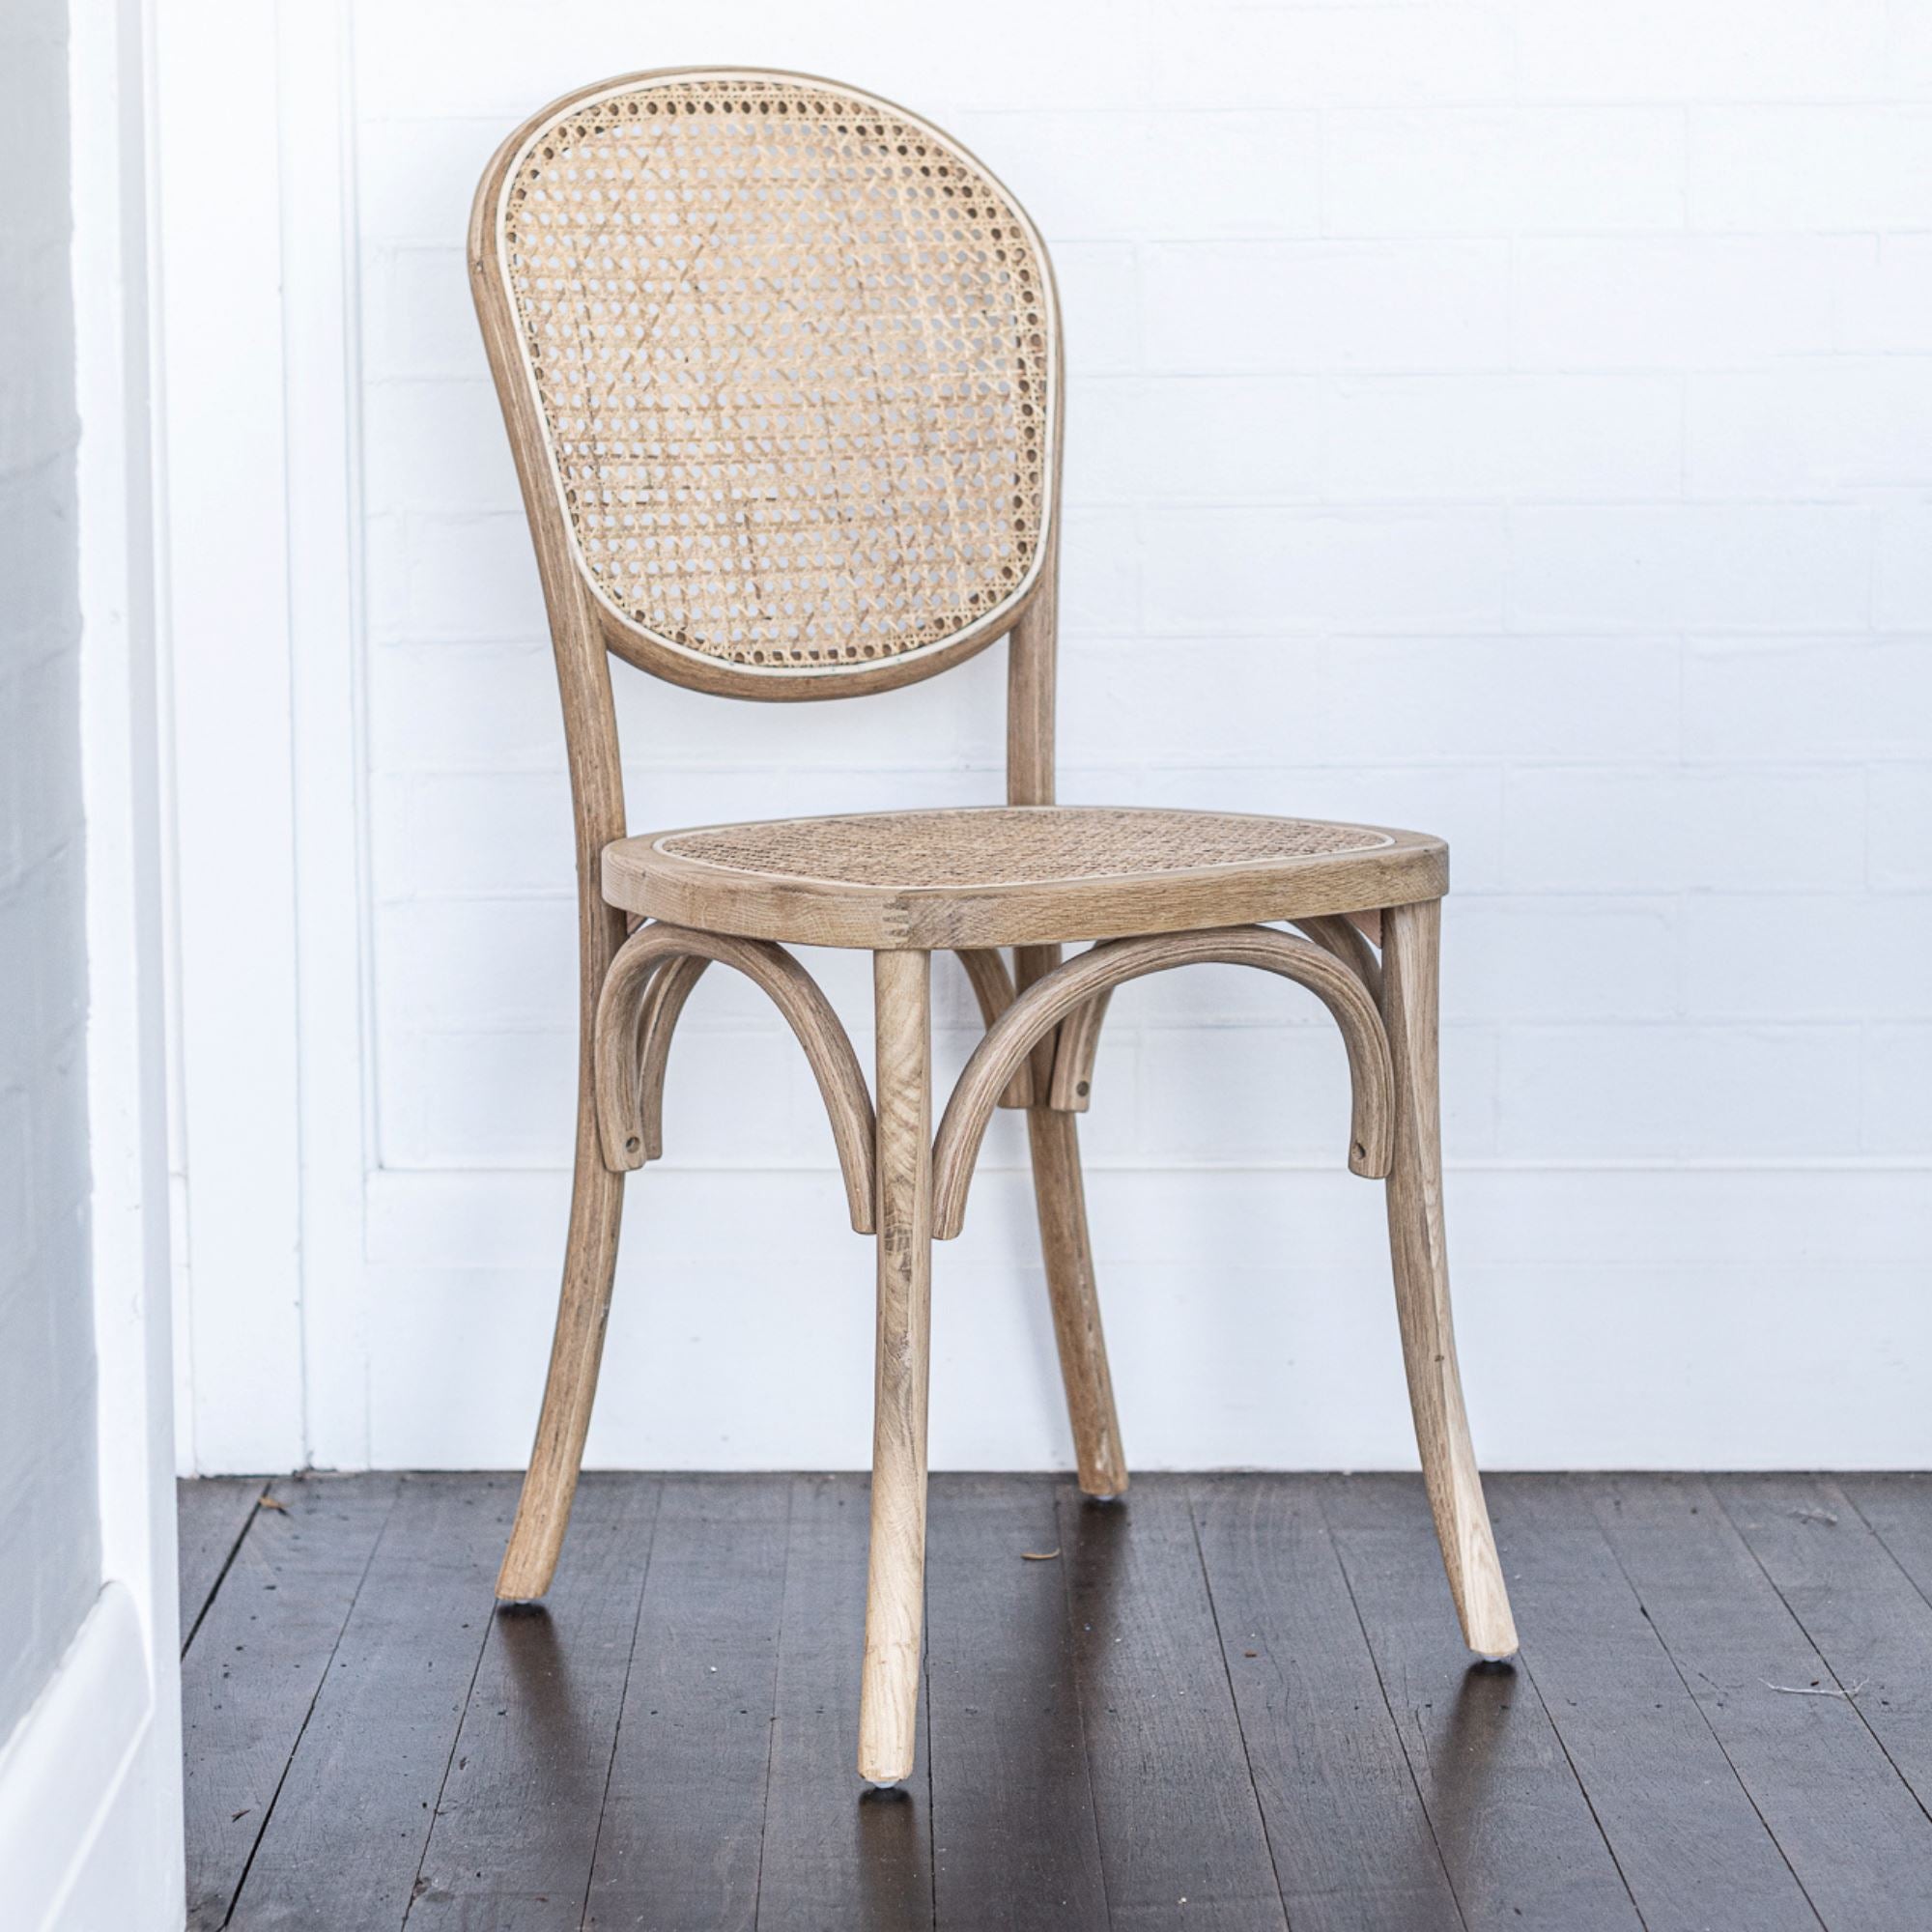 Willow Rounded Back Chair Dining Furniture Beachwood Designs 